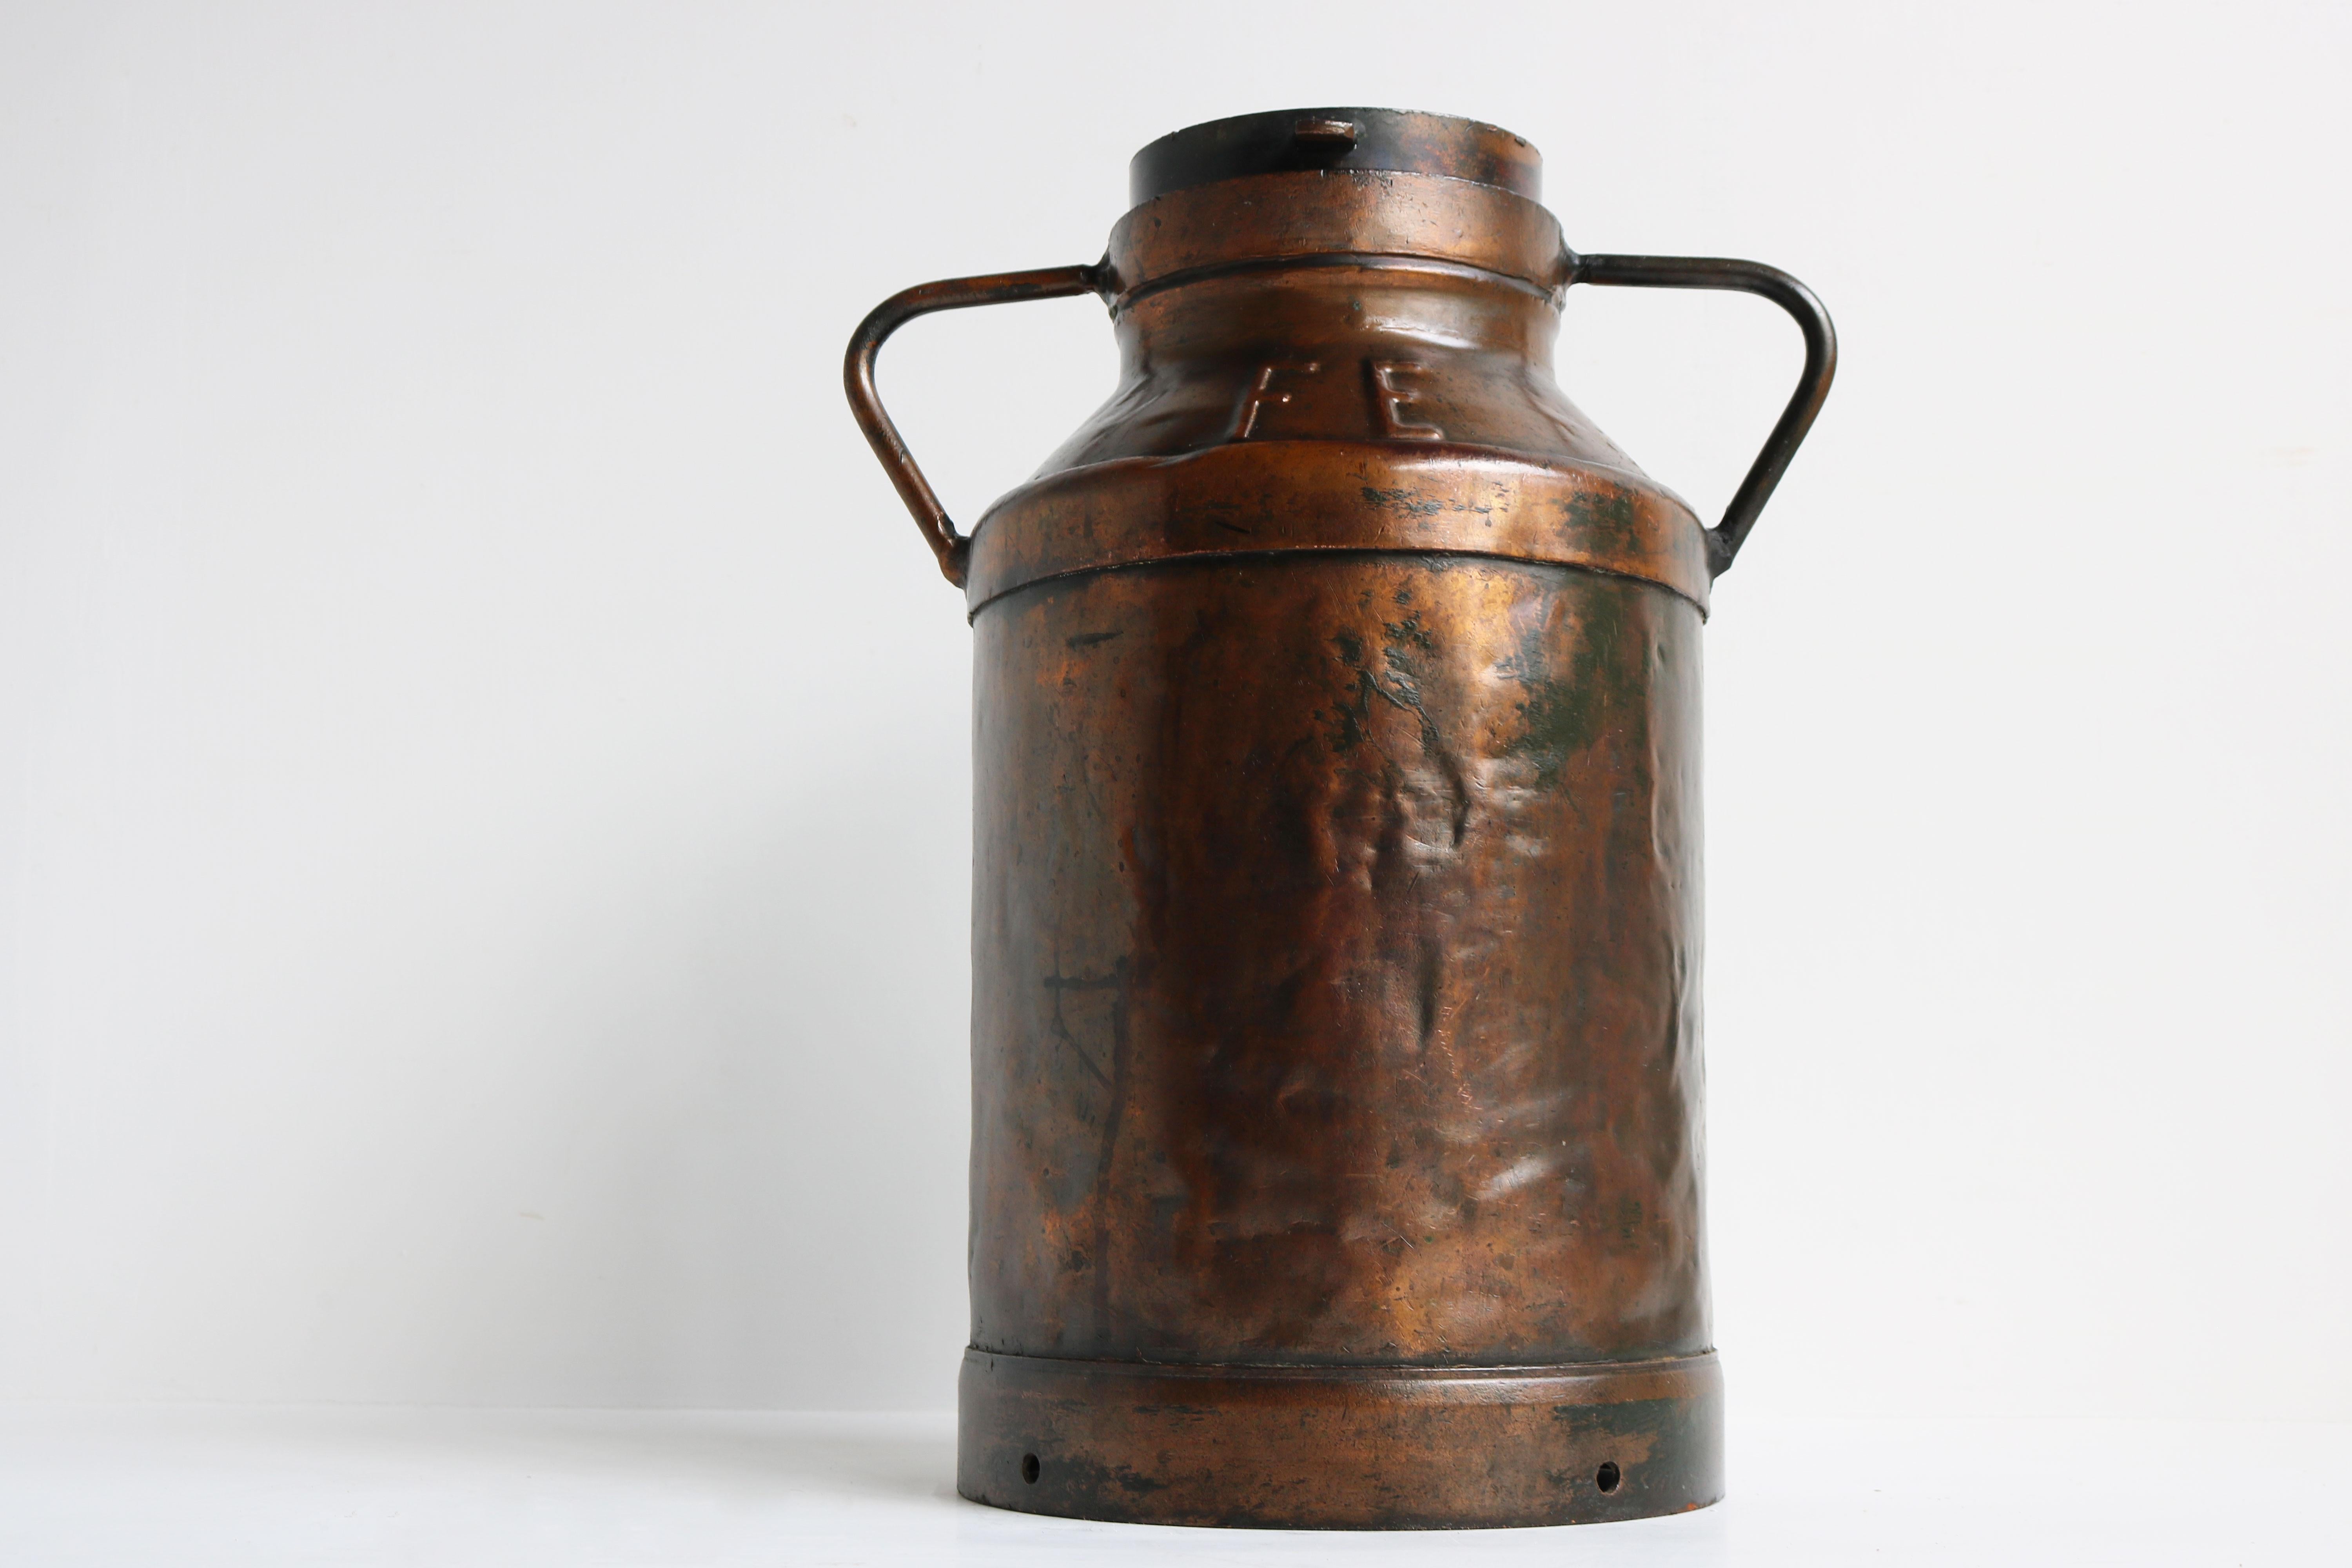 Heavy antique copper milk can / jug from France 1880s. Amazing to use as an umbrella / stick stand in your hallway. 
This model has a gorgeous aged patina & is fully original, the lid can be removed easily and is attached by a chain. 
This antique